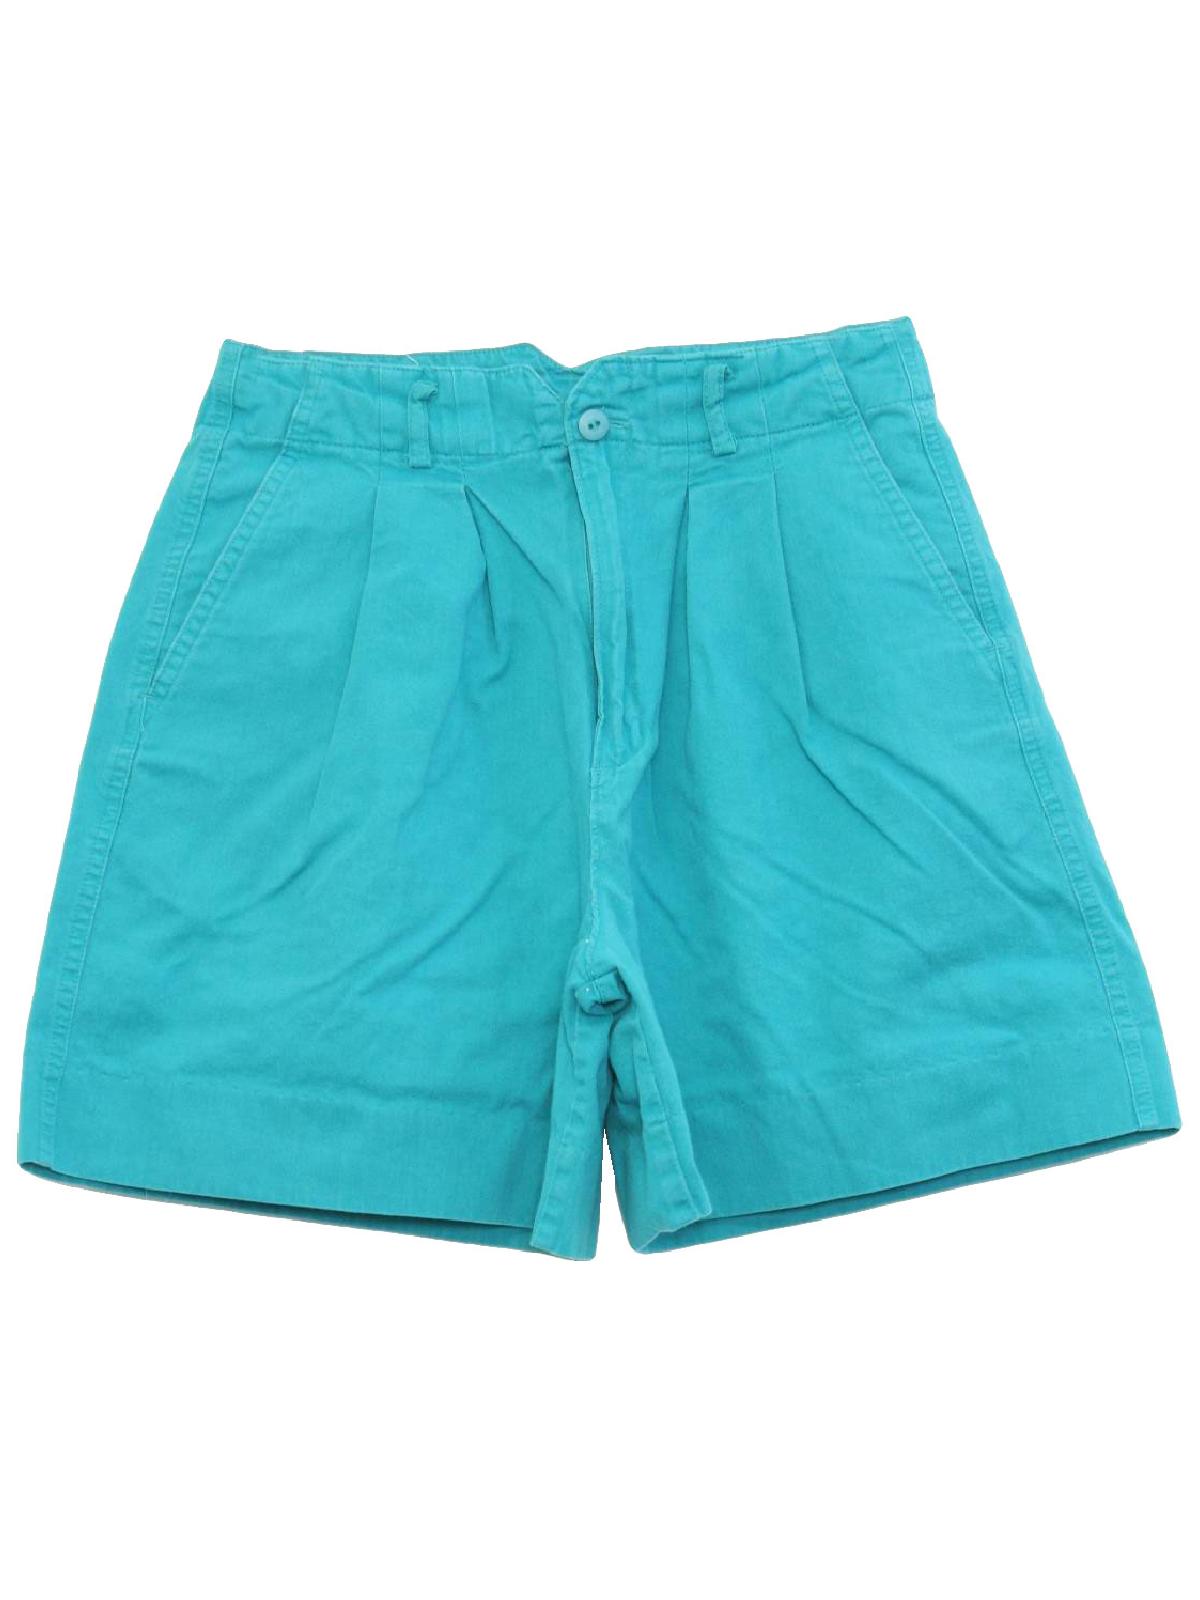 Vintage 1980's Shorts: Late 80s -Petite Trends- Womens teal green ...